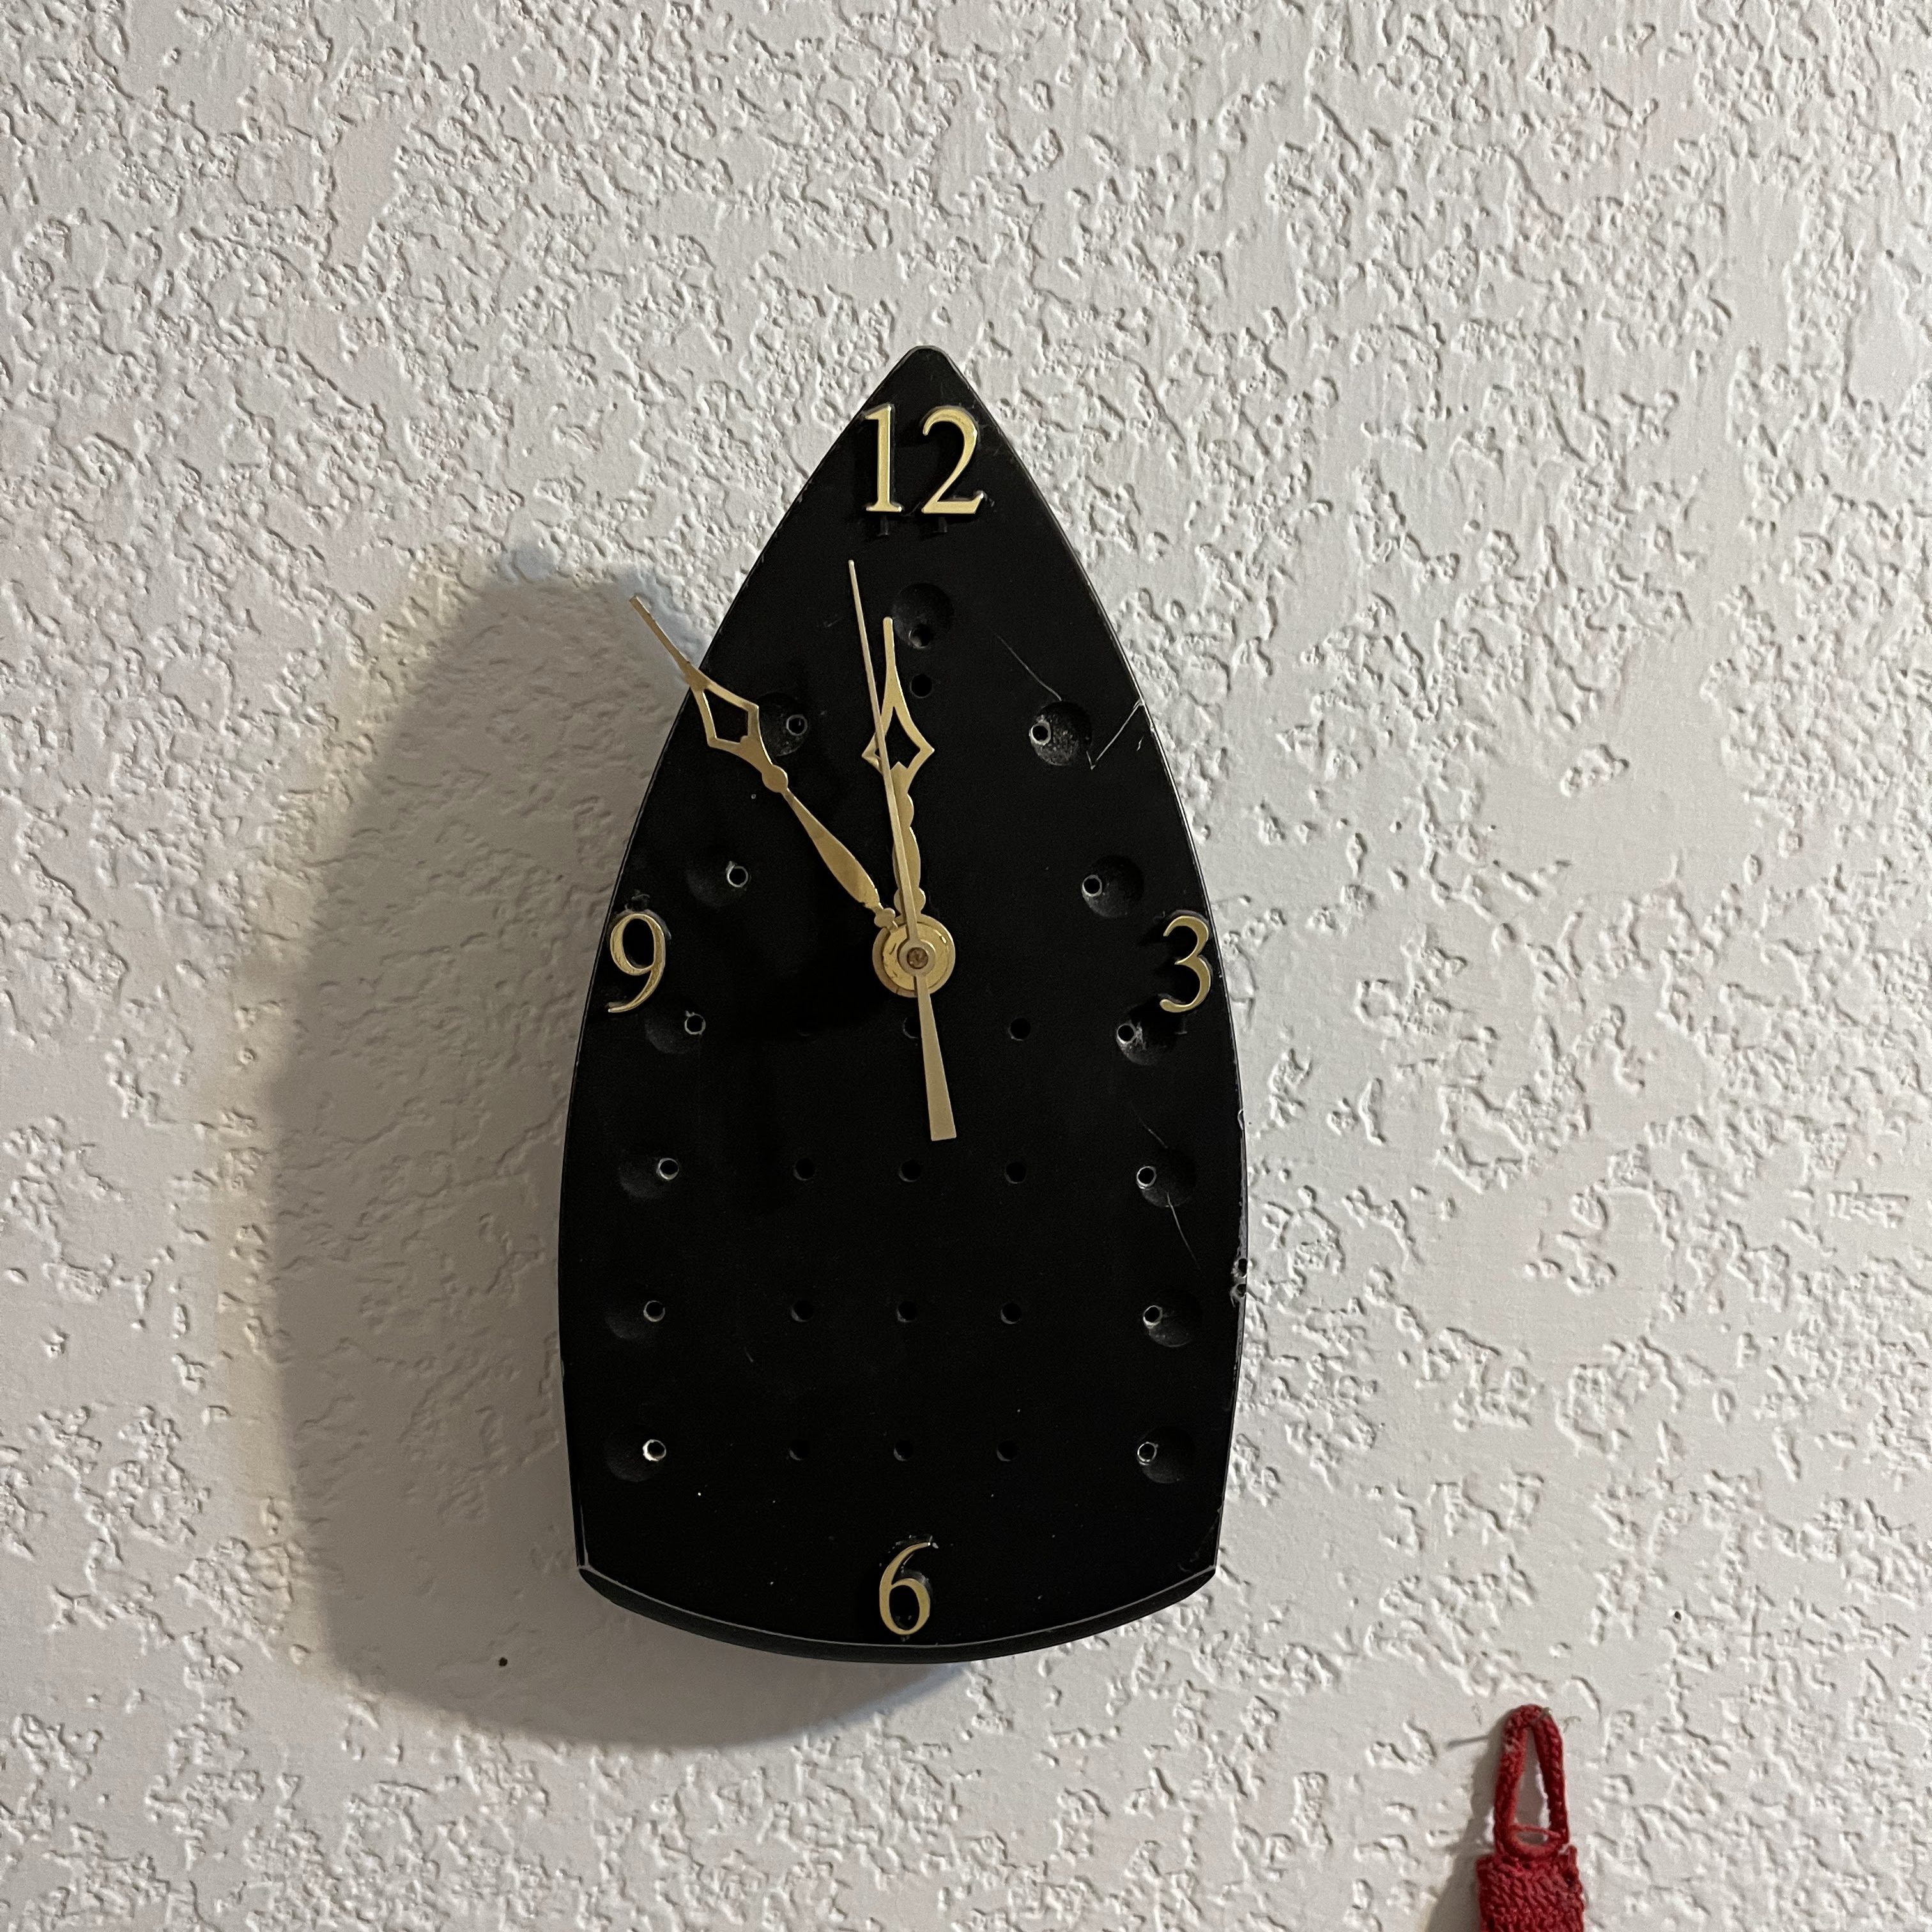 Old iron transformed into a new clock